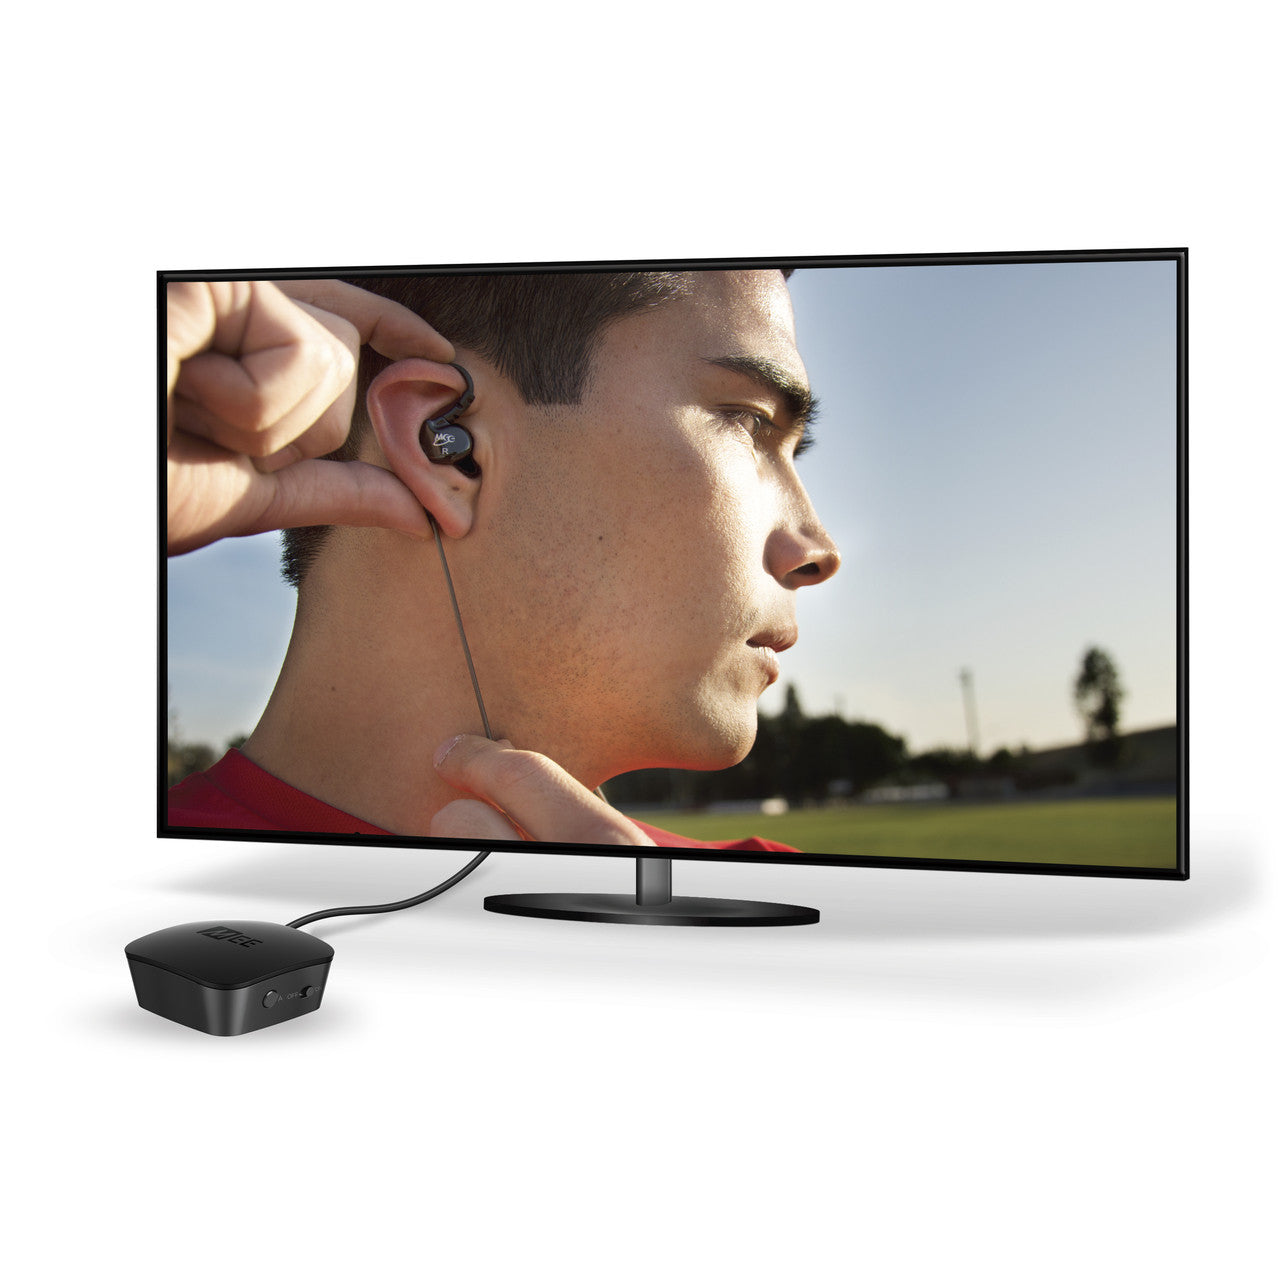 Connect Bluetooth Audio Transmitter for TV